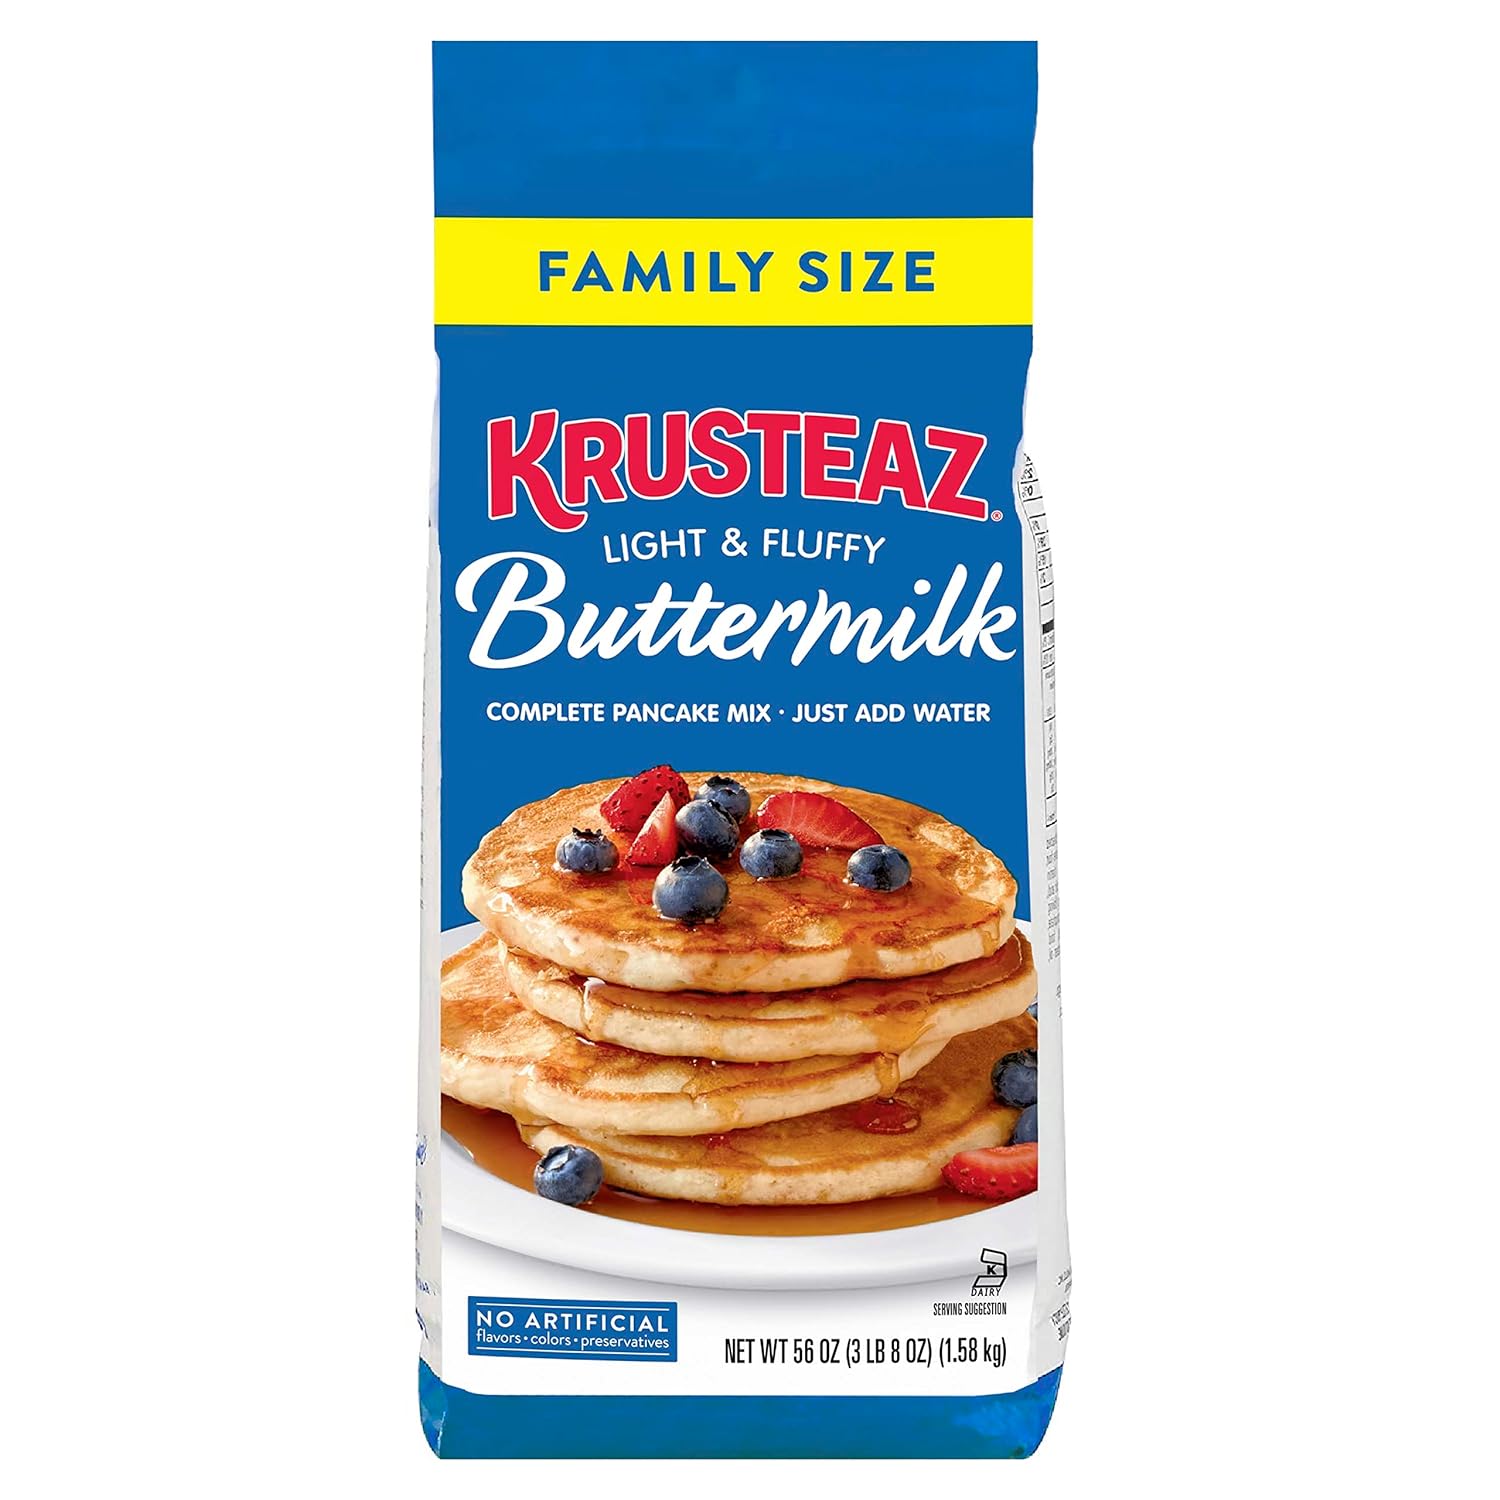 Krusteaz Complete Buttermilk Pancake and Waffle Mix, Light & Fluffy, 3.5 lb Bags (Pack of 12)